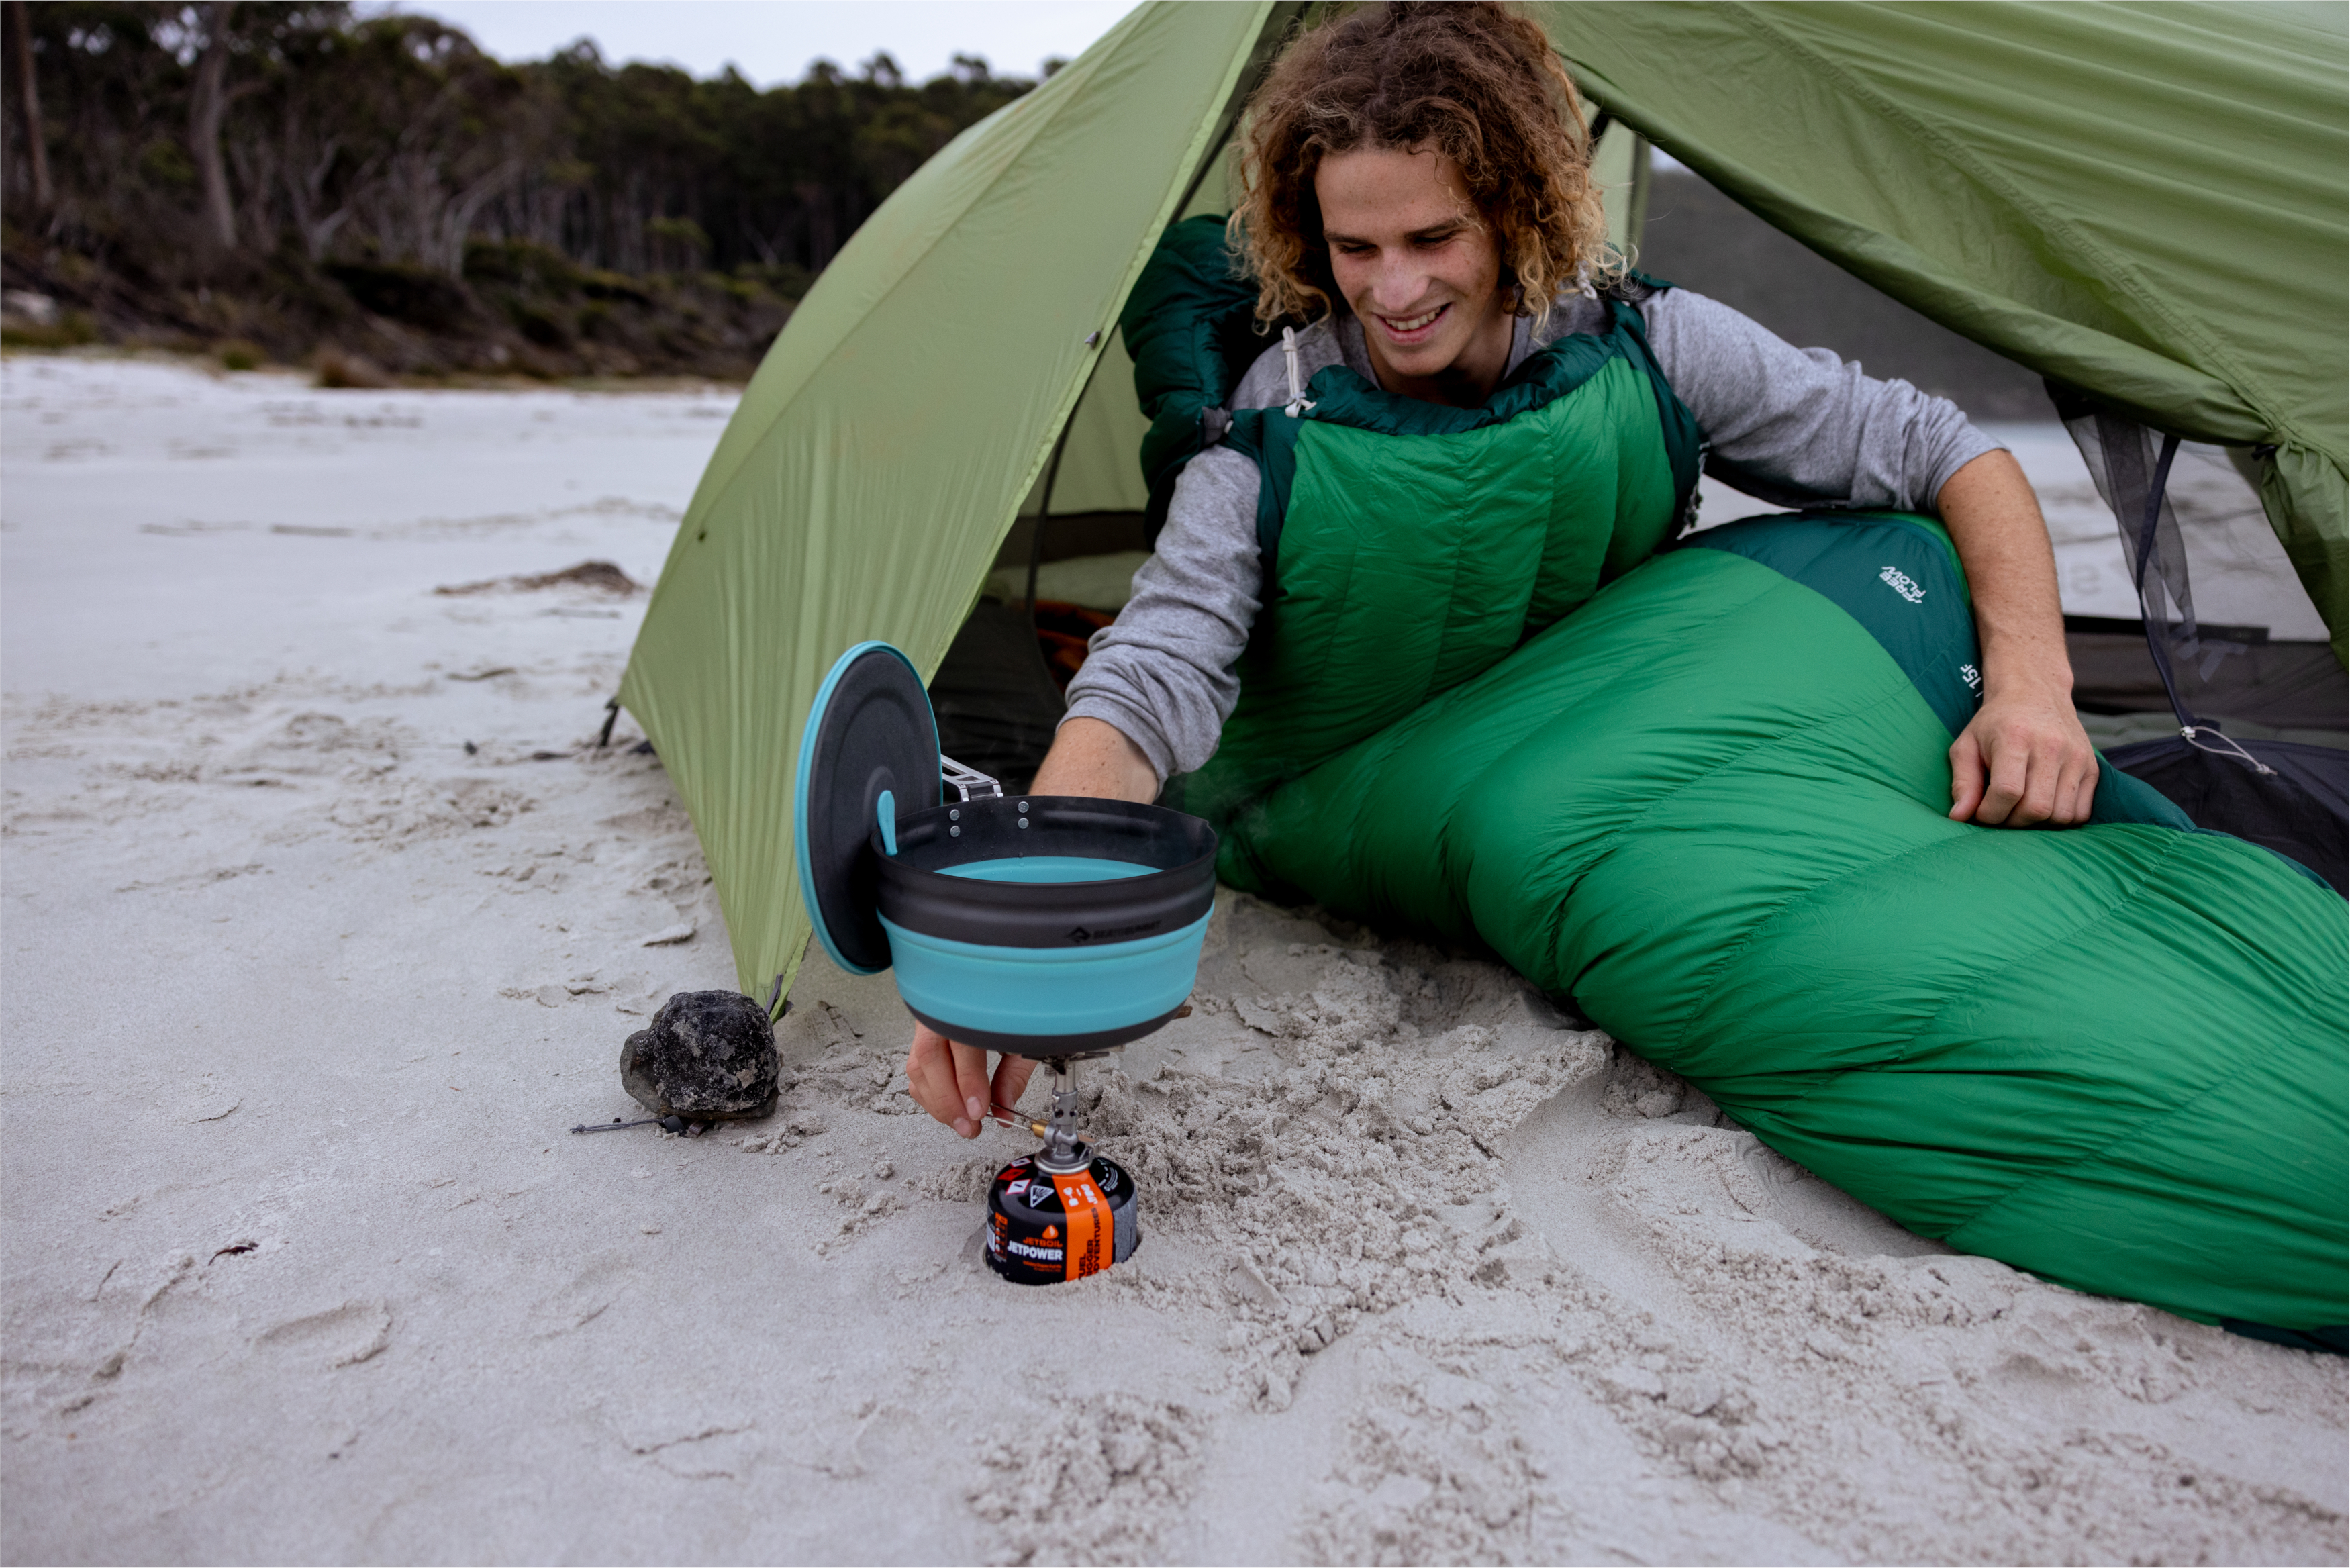 Free Gear Fridays: Win a Frontier Ultralight Cookset From Sea to Summit